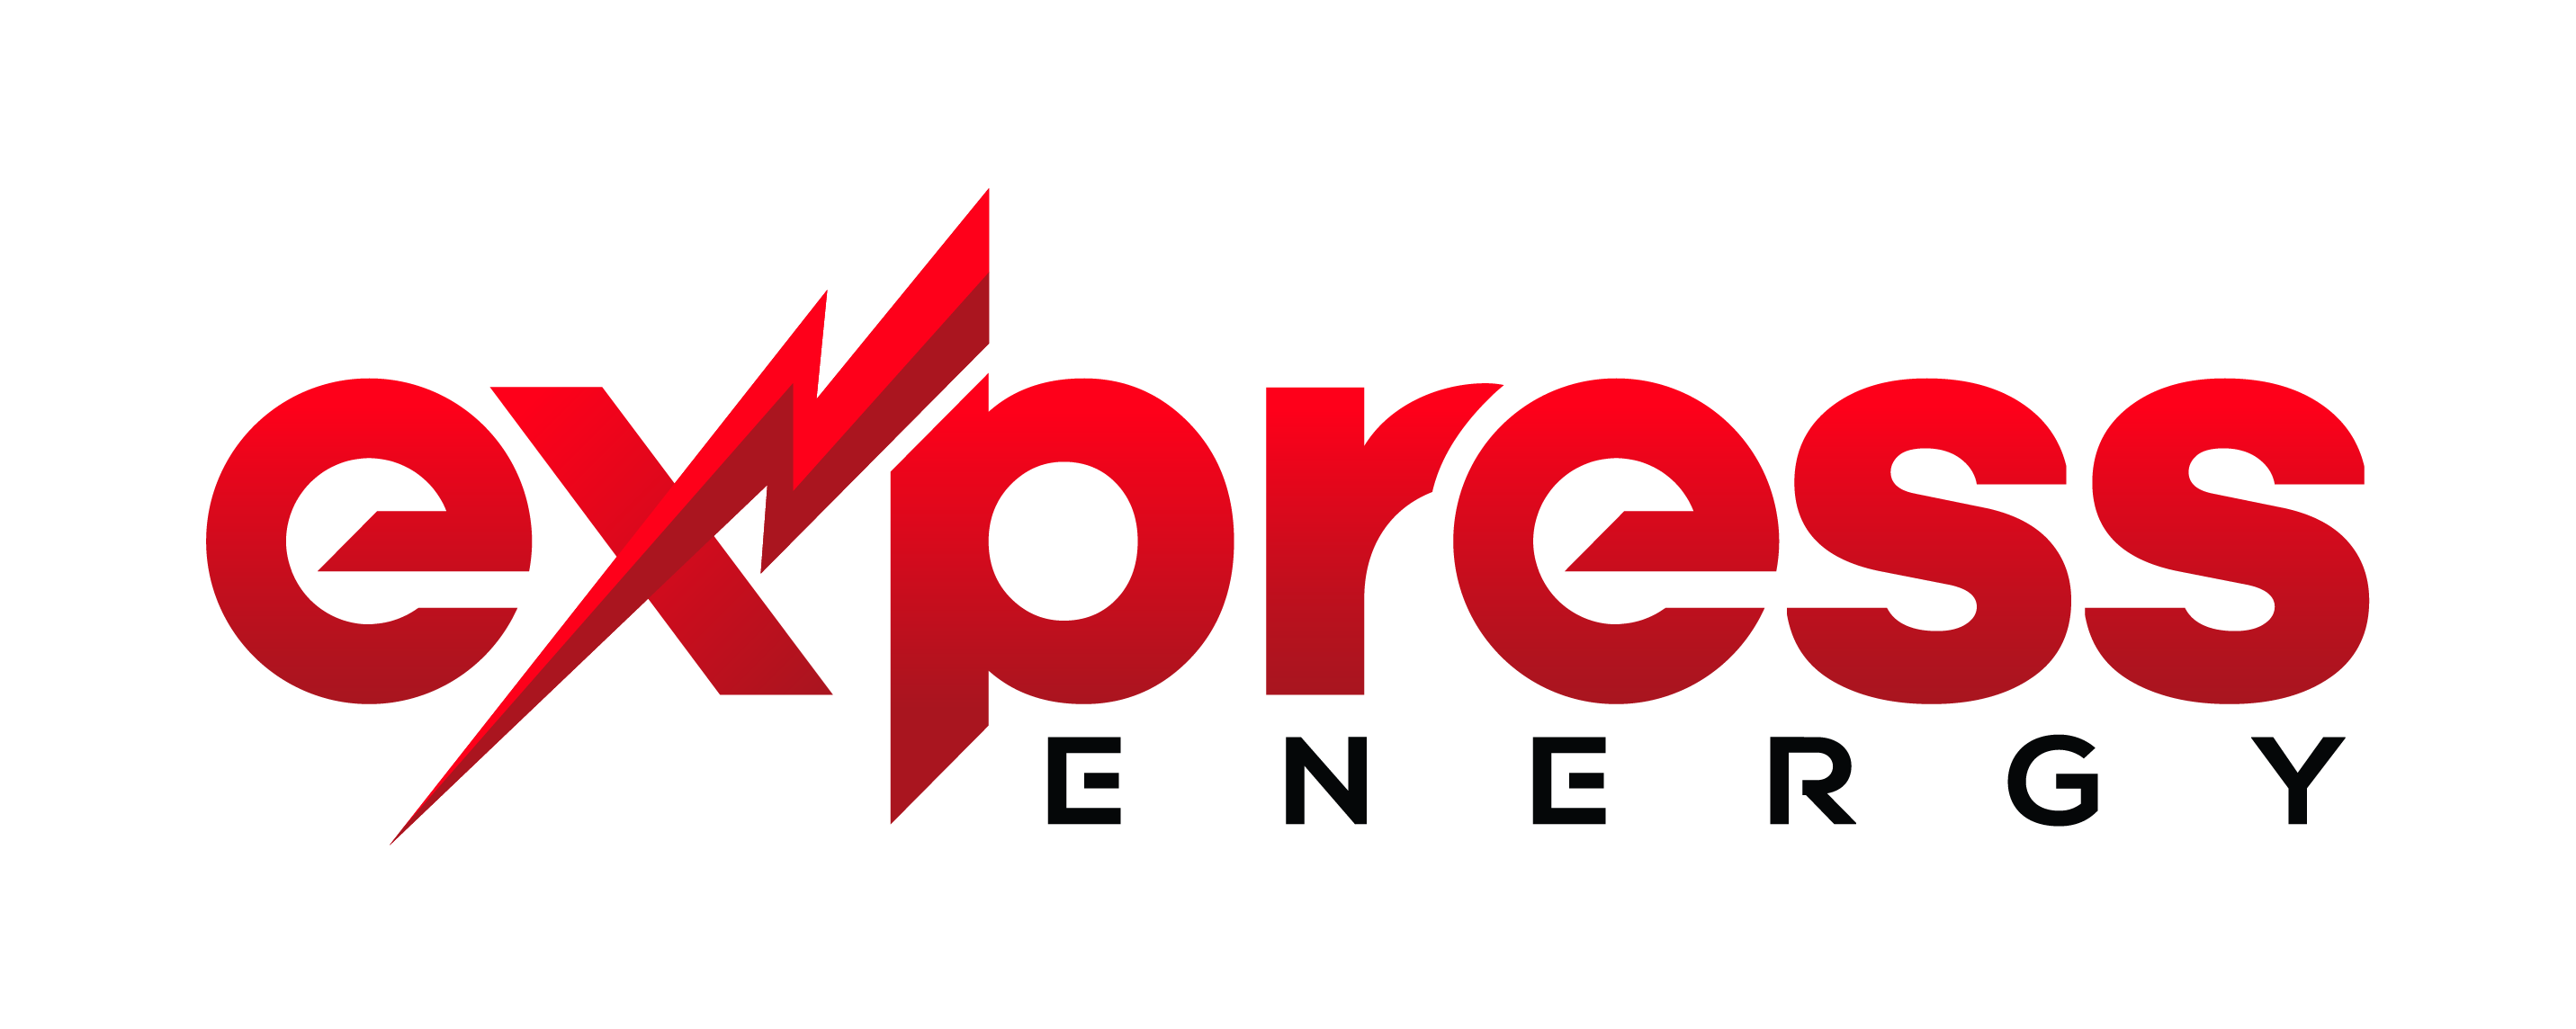 Express Energy Review, Electricity Rates and Plans